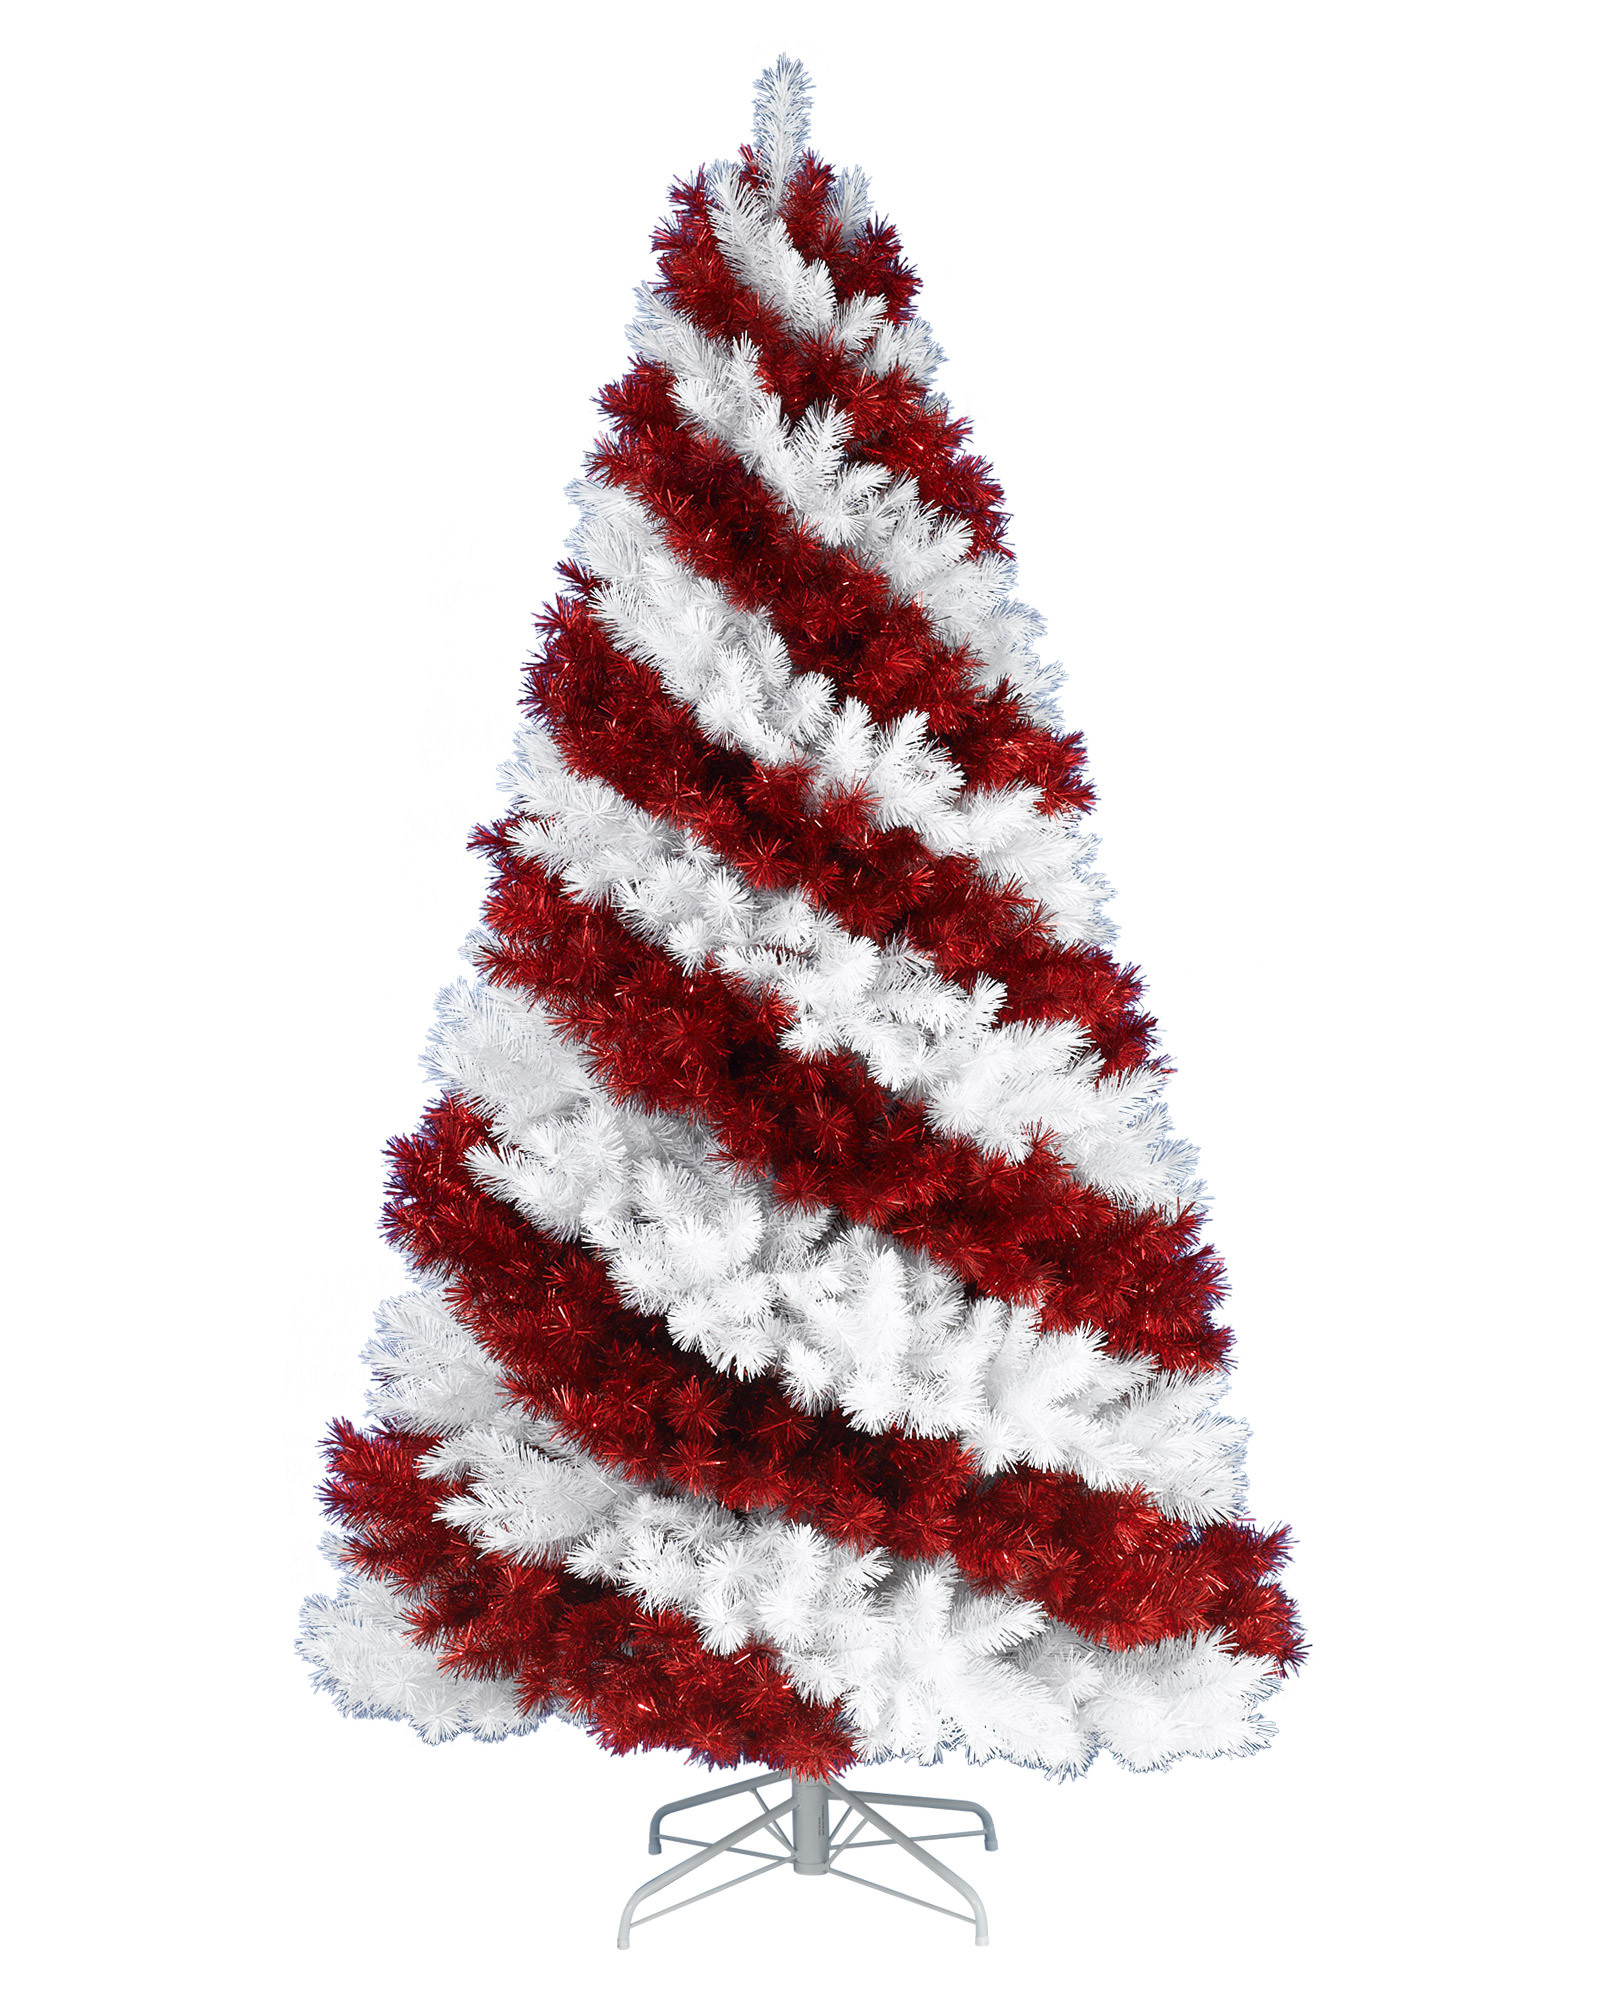 Peppermint Candy Christmas Tree
 Candy Cane Christmas Trees line